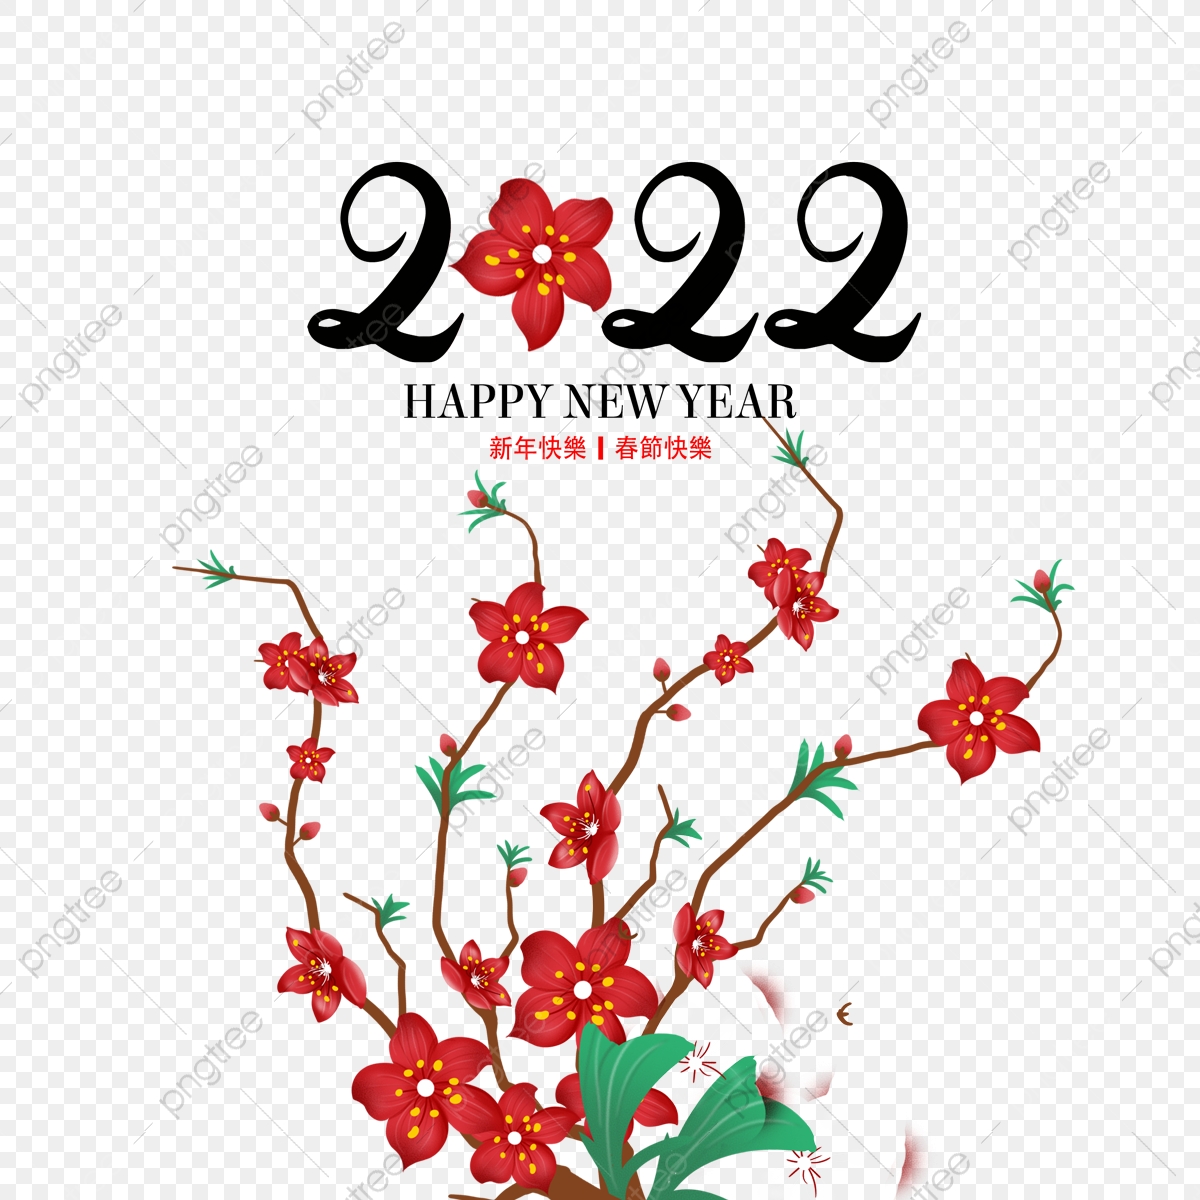 pngtree-2022-chinese-new-year-red-flowers-png-image_5519750